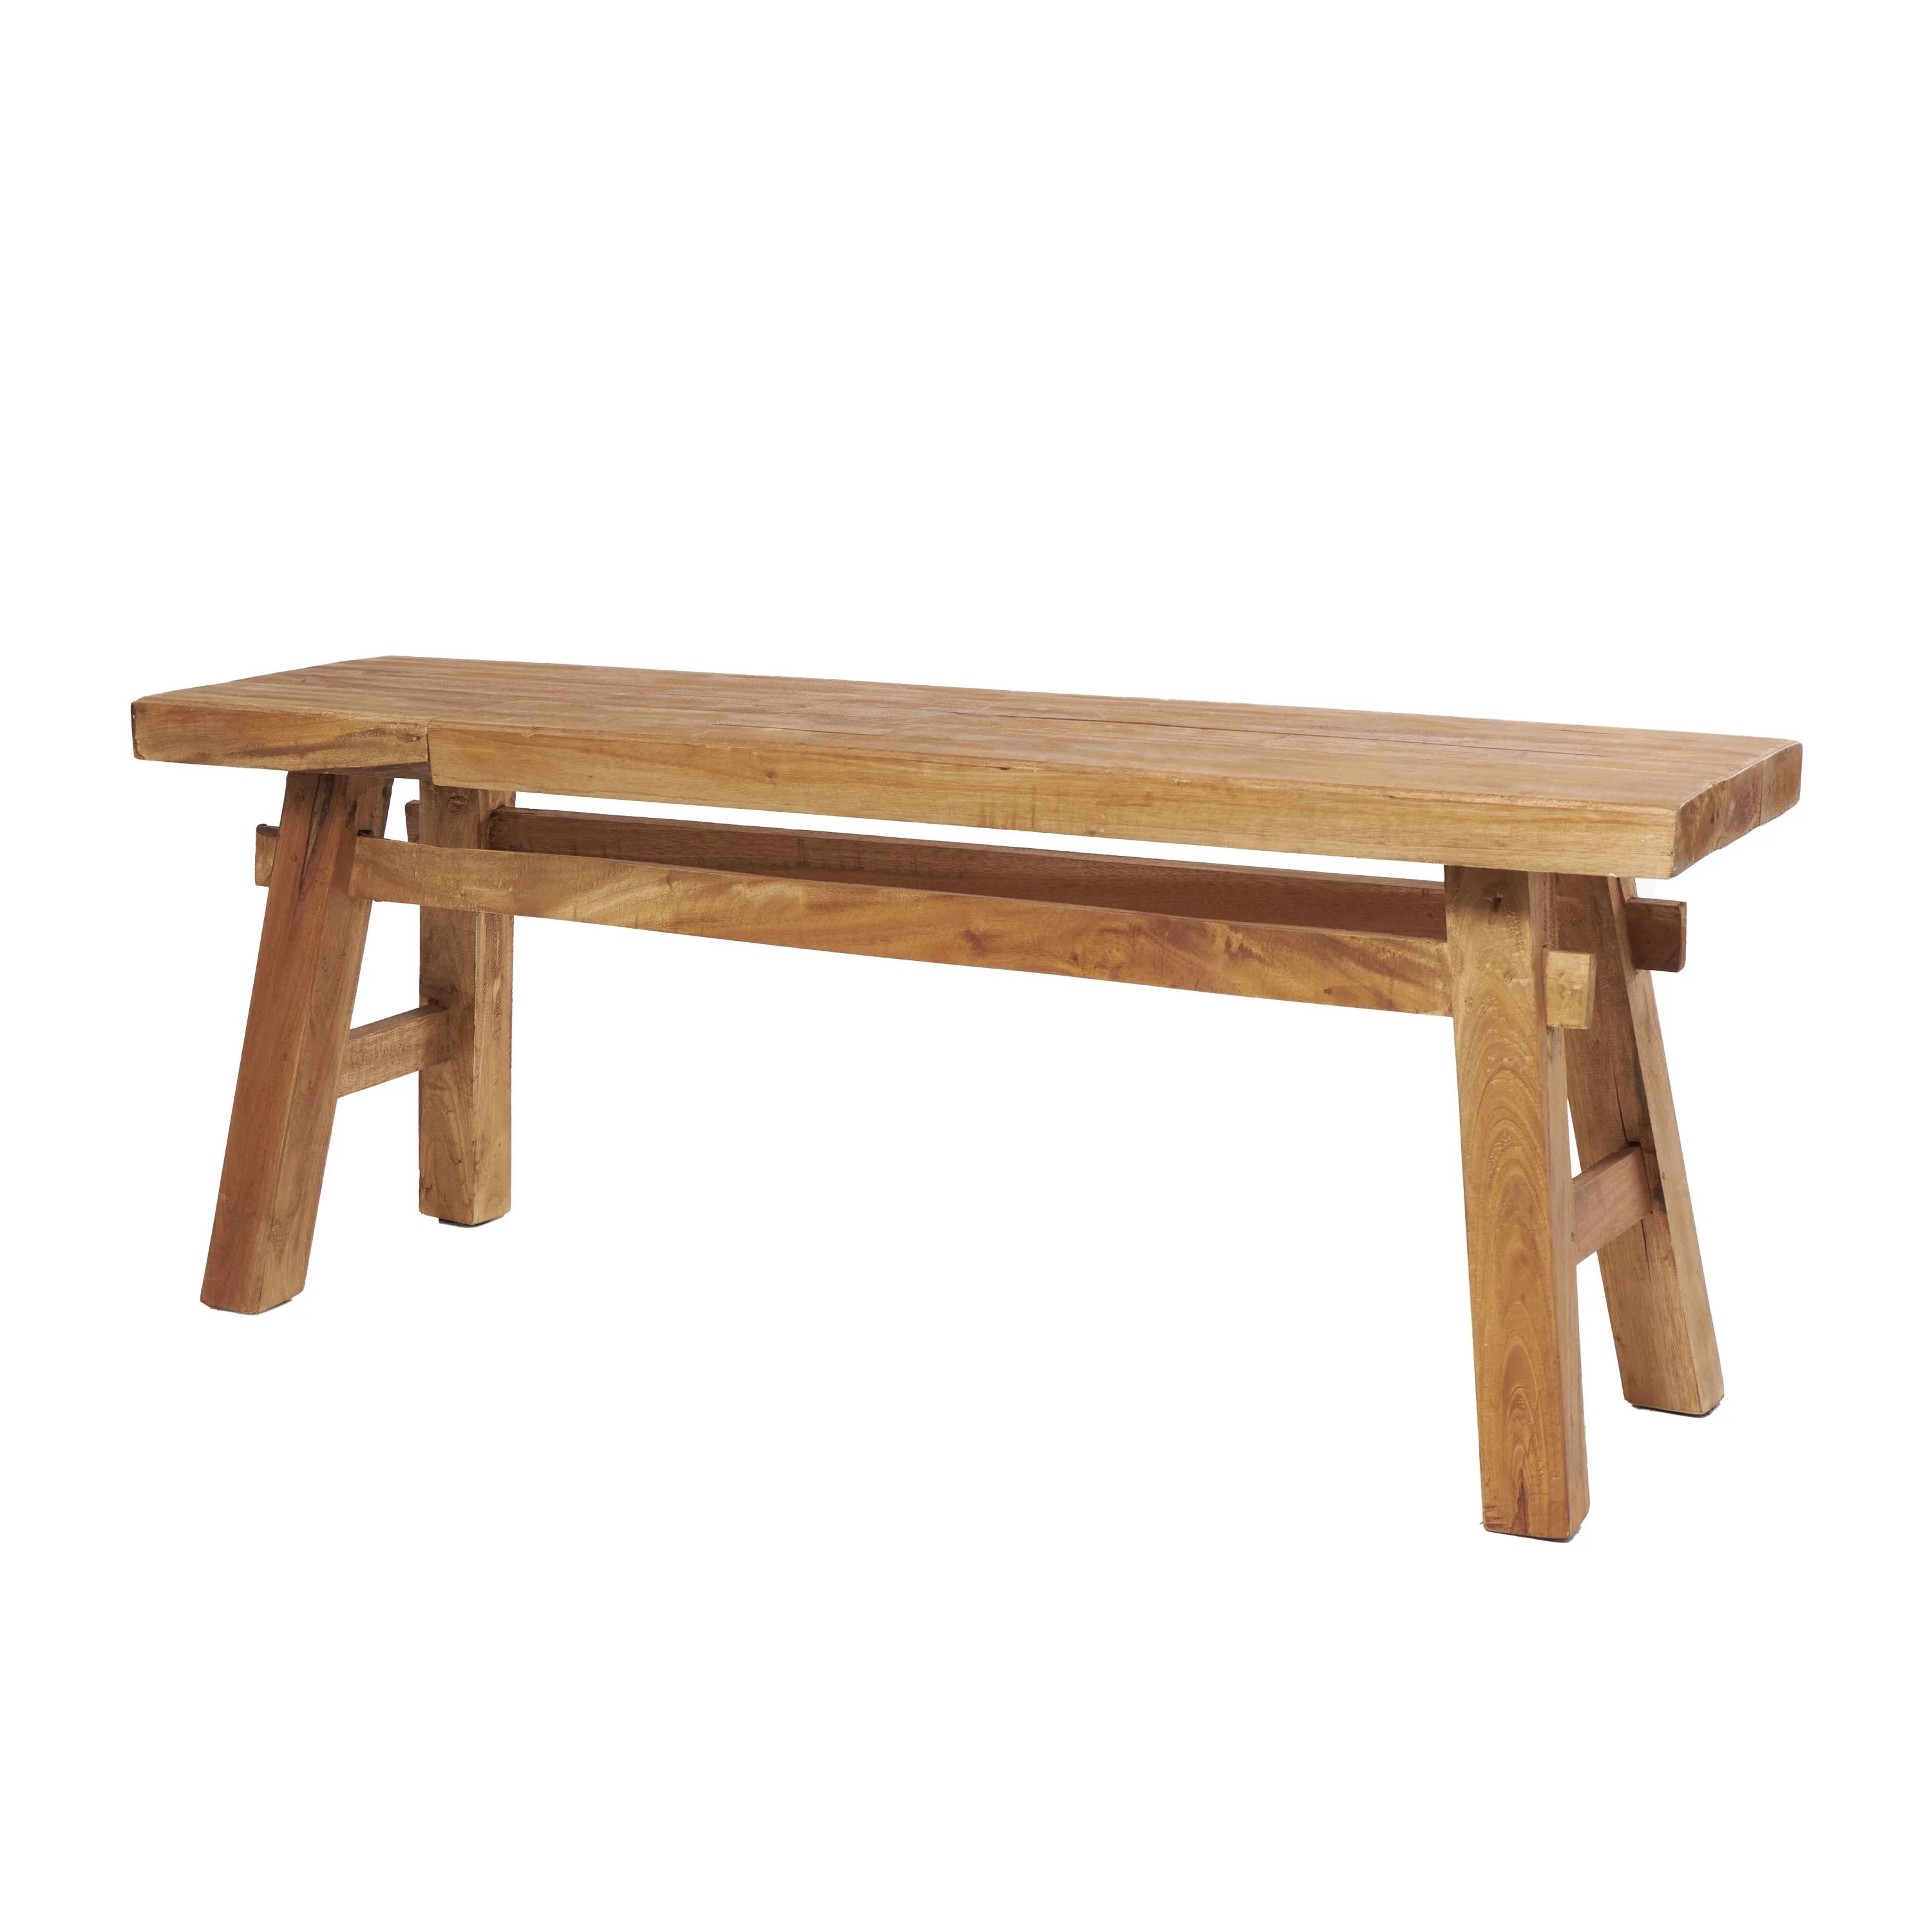 DecMode Wood Handmade Distressed Bench with High Trestle Legs, Brown | Walmart (US)